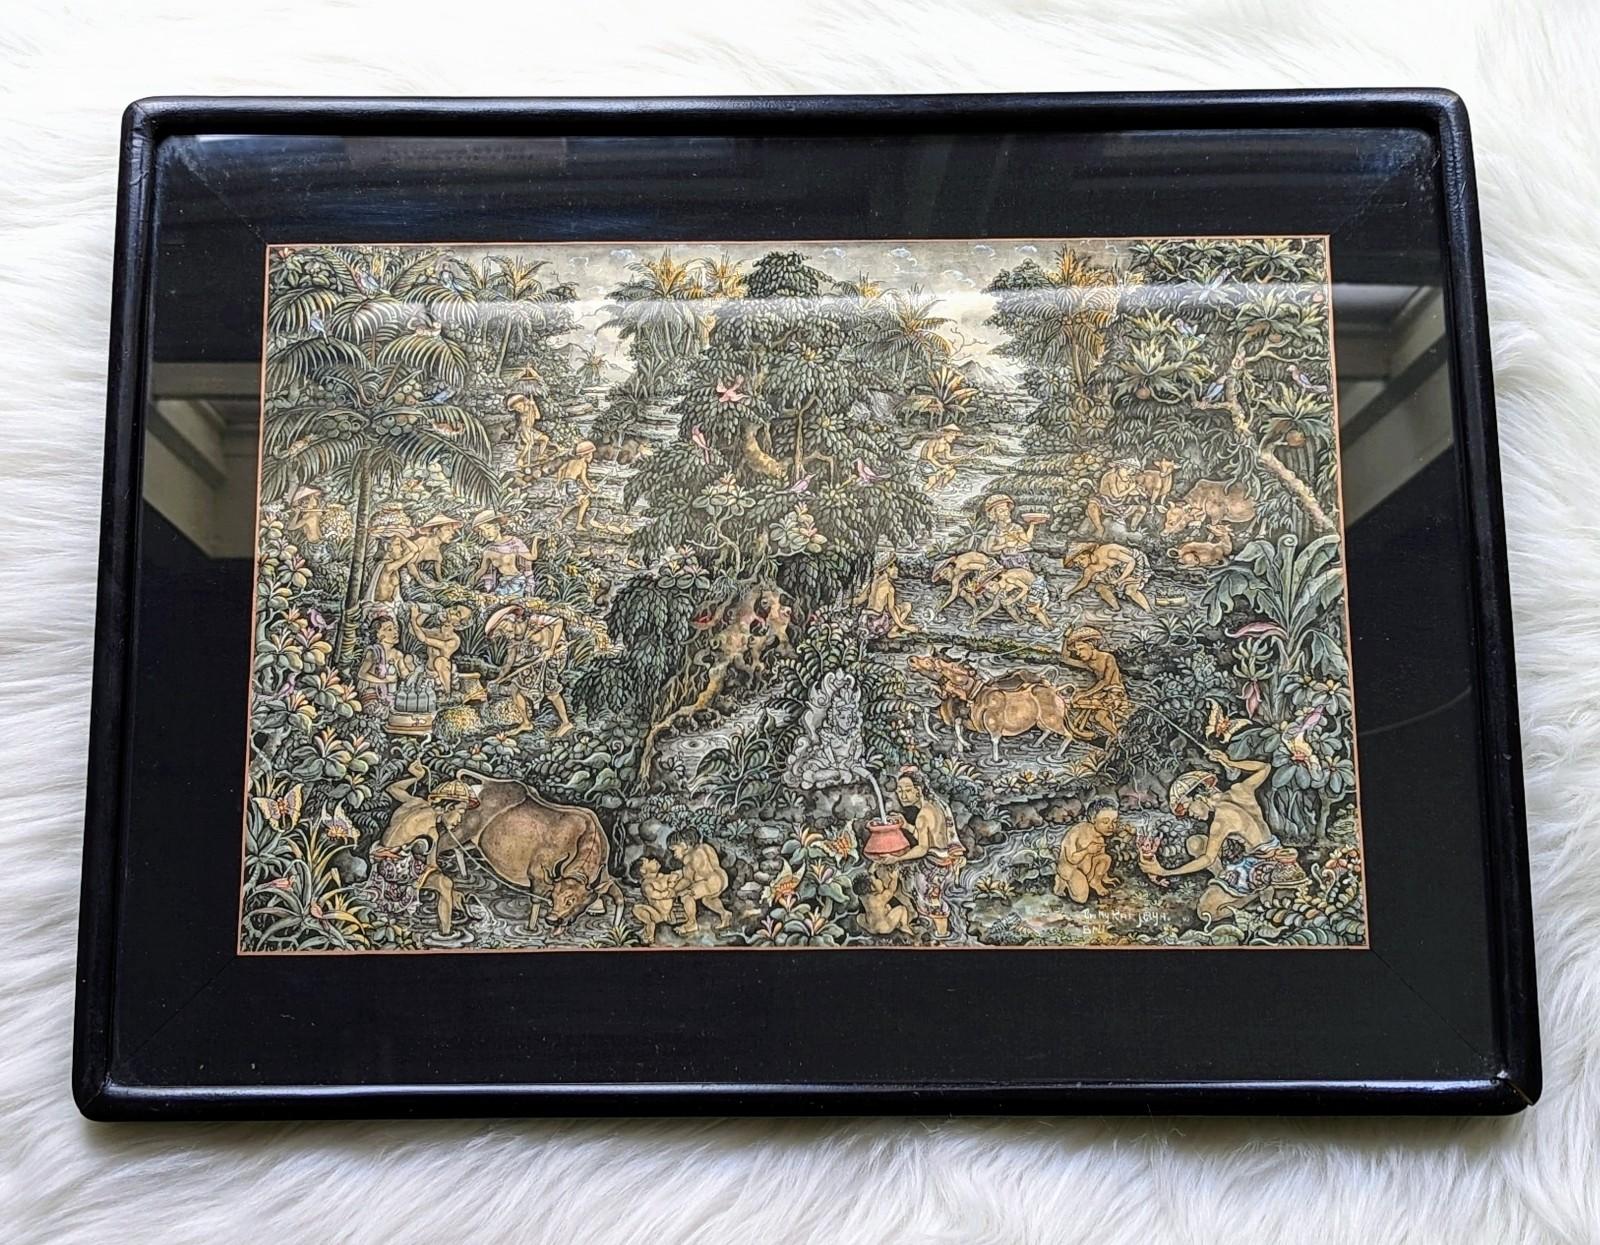 Stunning hand painted original Balinese traditional painting, featuring a scene of harvesting created in great detail. Signed by the artisan on the lower right hand corner. Measures a total of 15.5 inches in height by 20.75 inches in width and 1